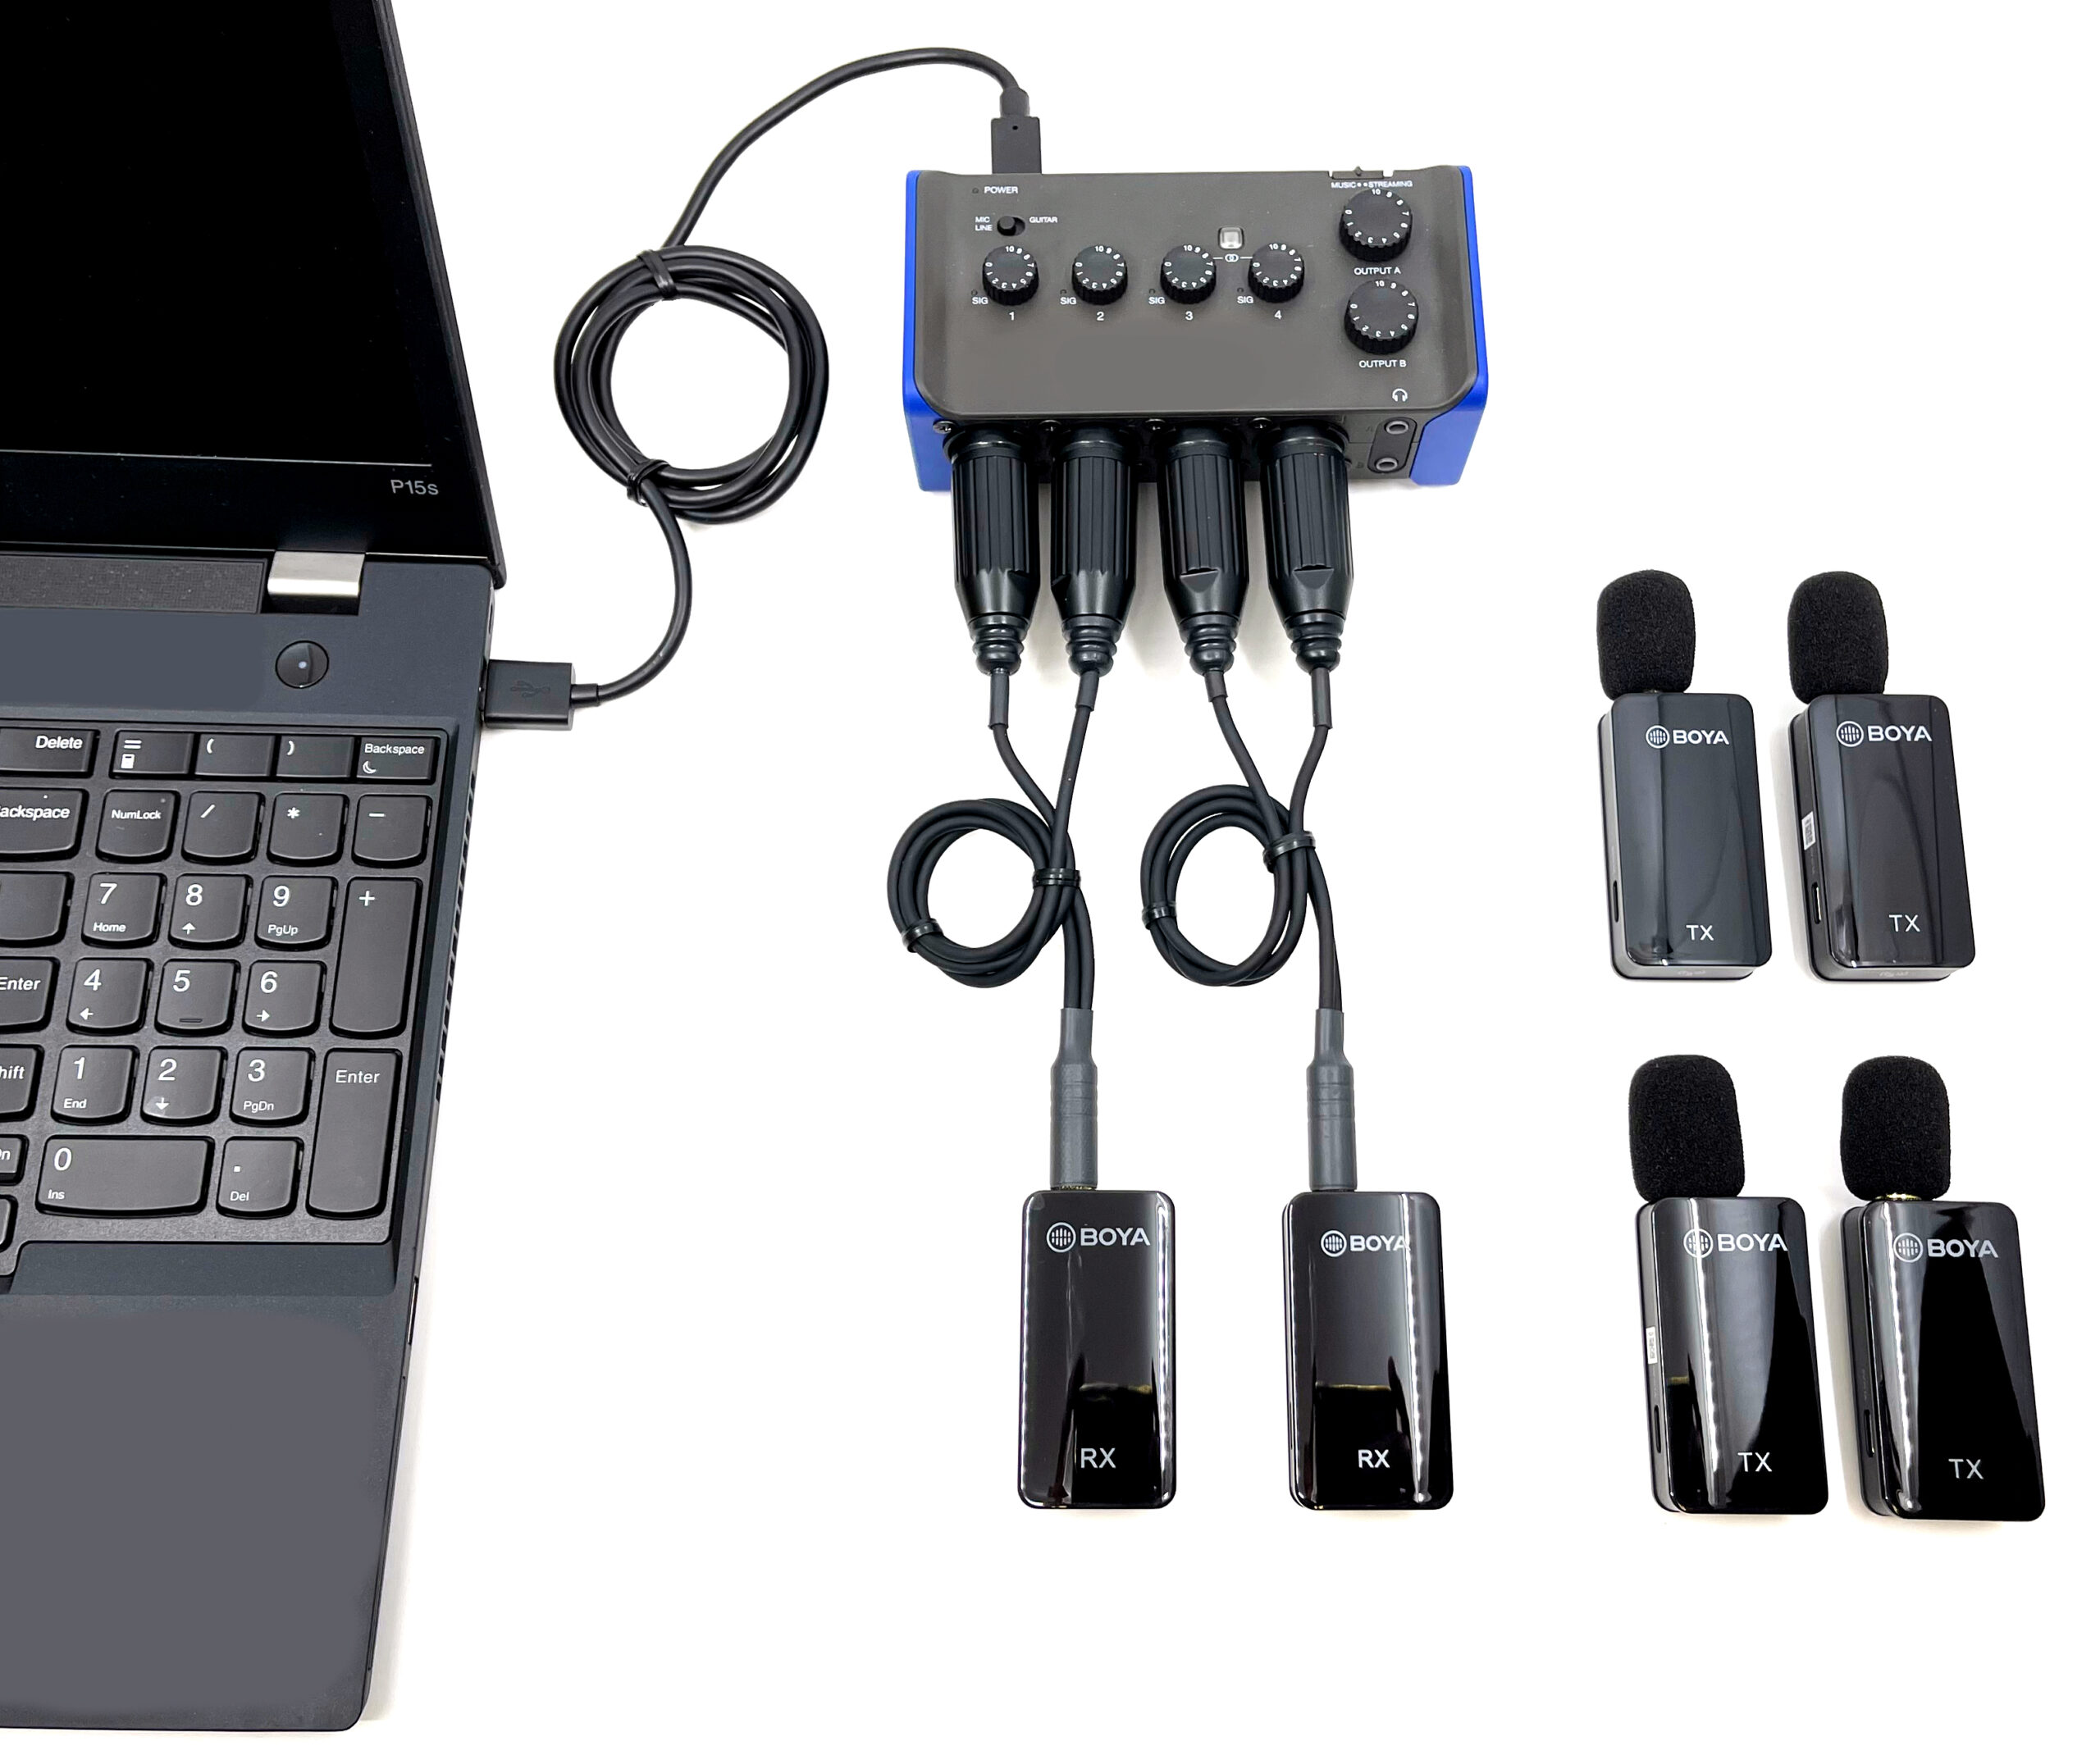 Court Reporter 4 wireless microphone system Questions & Answers